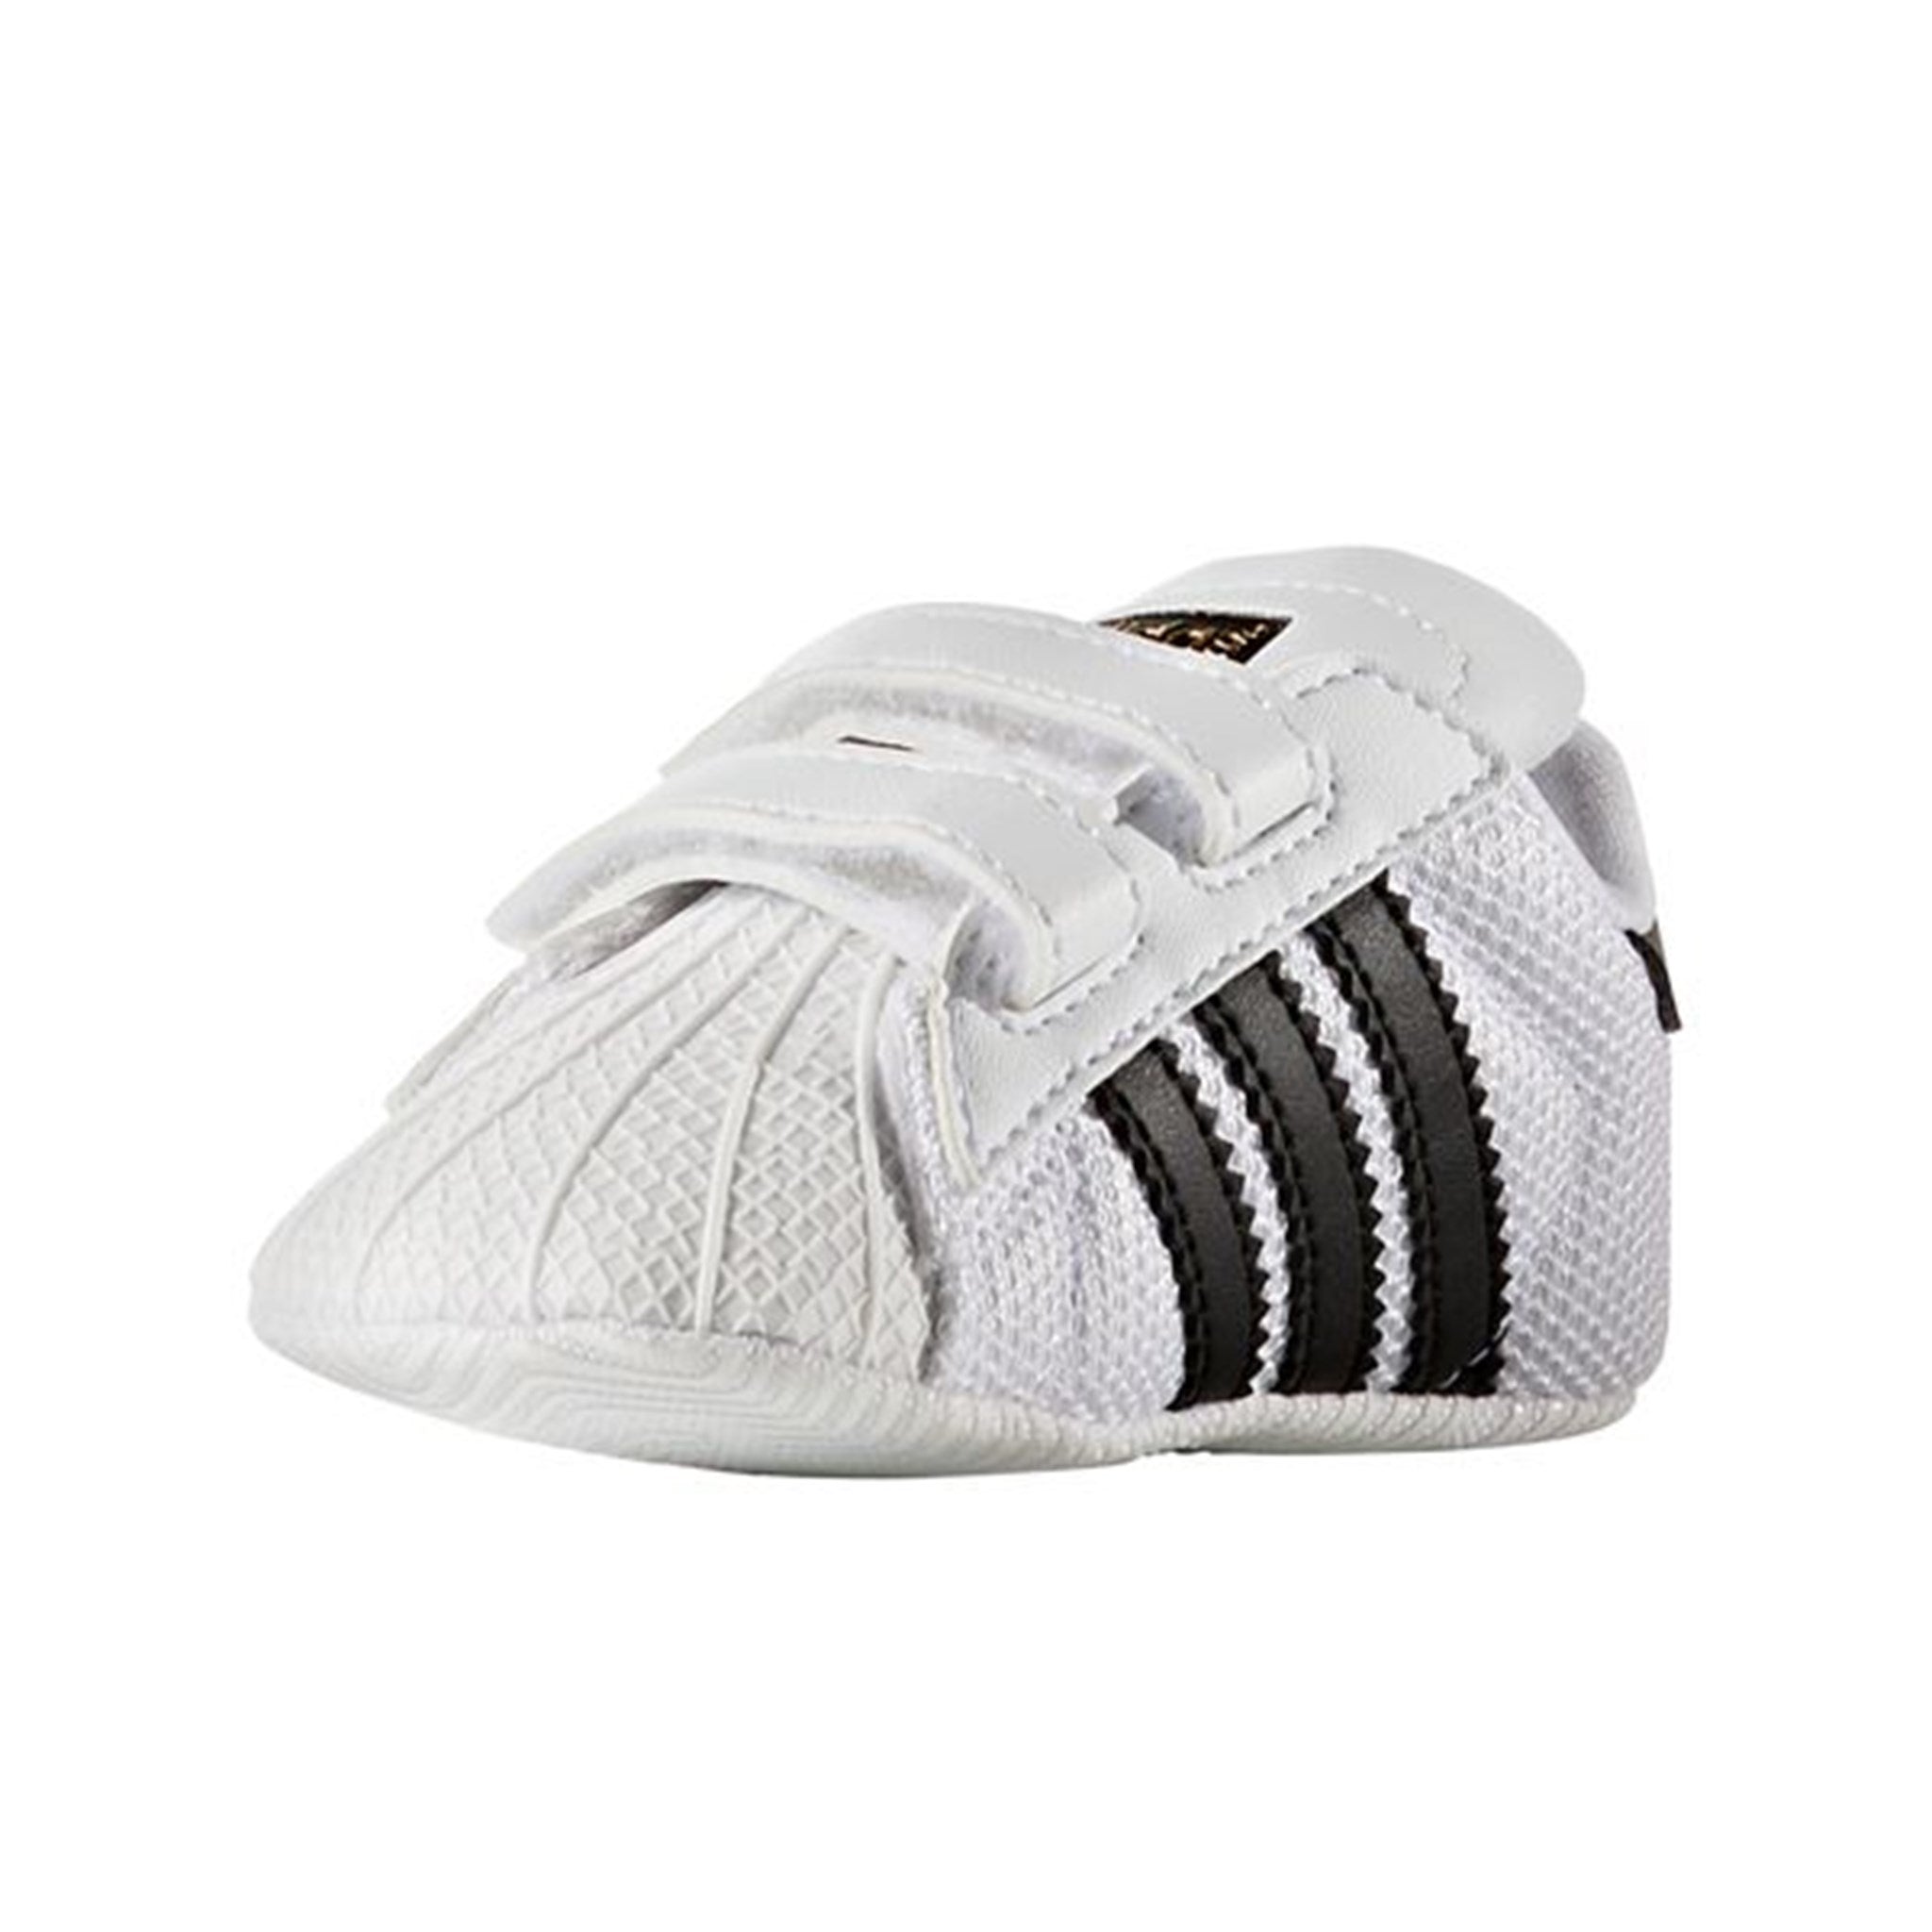 adidas Superstar Baby Sneakers White/Black S79916 4